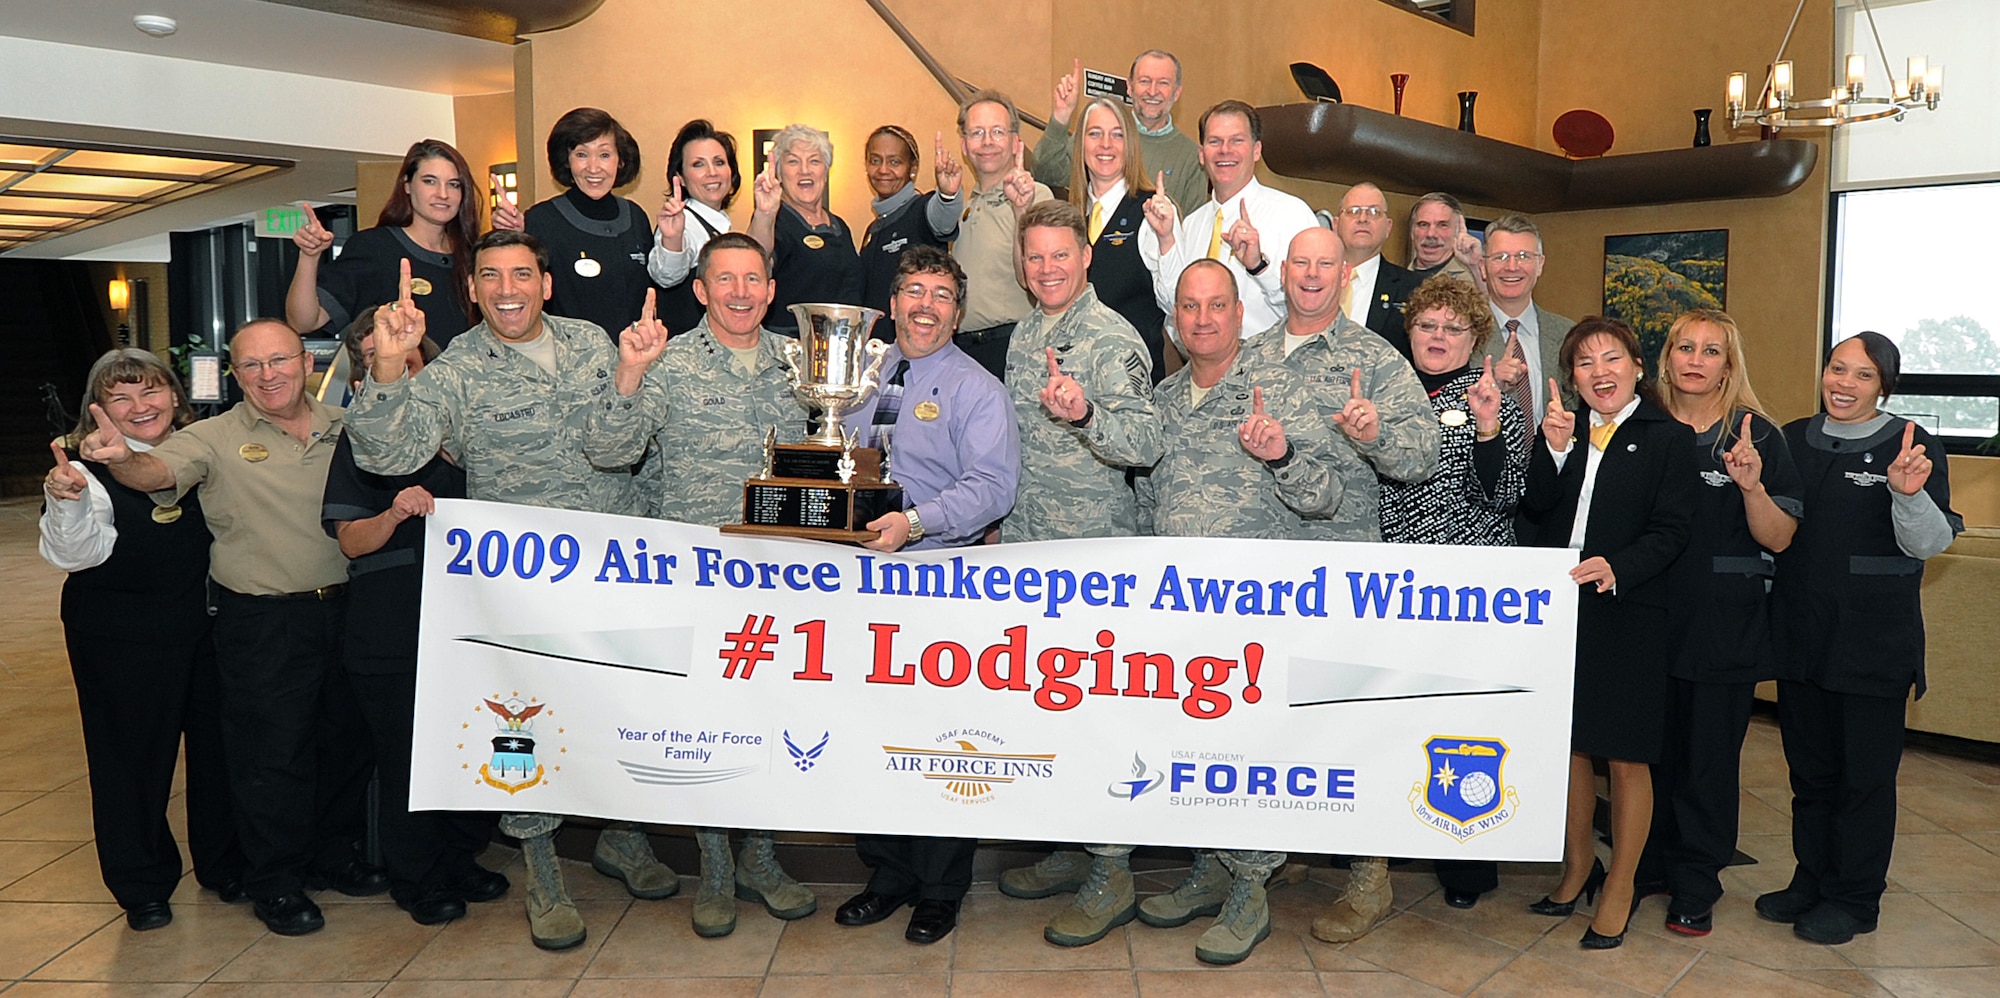 Academy leaders and Rampart Lodge staff pose for a photo in the Rampart Lodge lobby Dec. 3, 2009, after having been named the best lodging facility in the Air Force 2009 Innkeeper Awards. (U.S. Air Force photo/Rachel Boettcher)